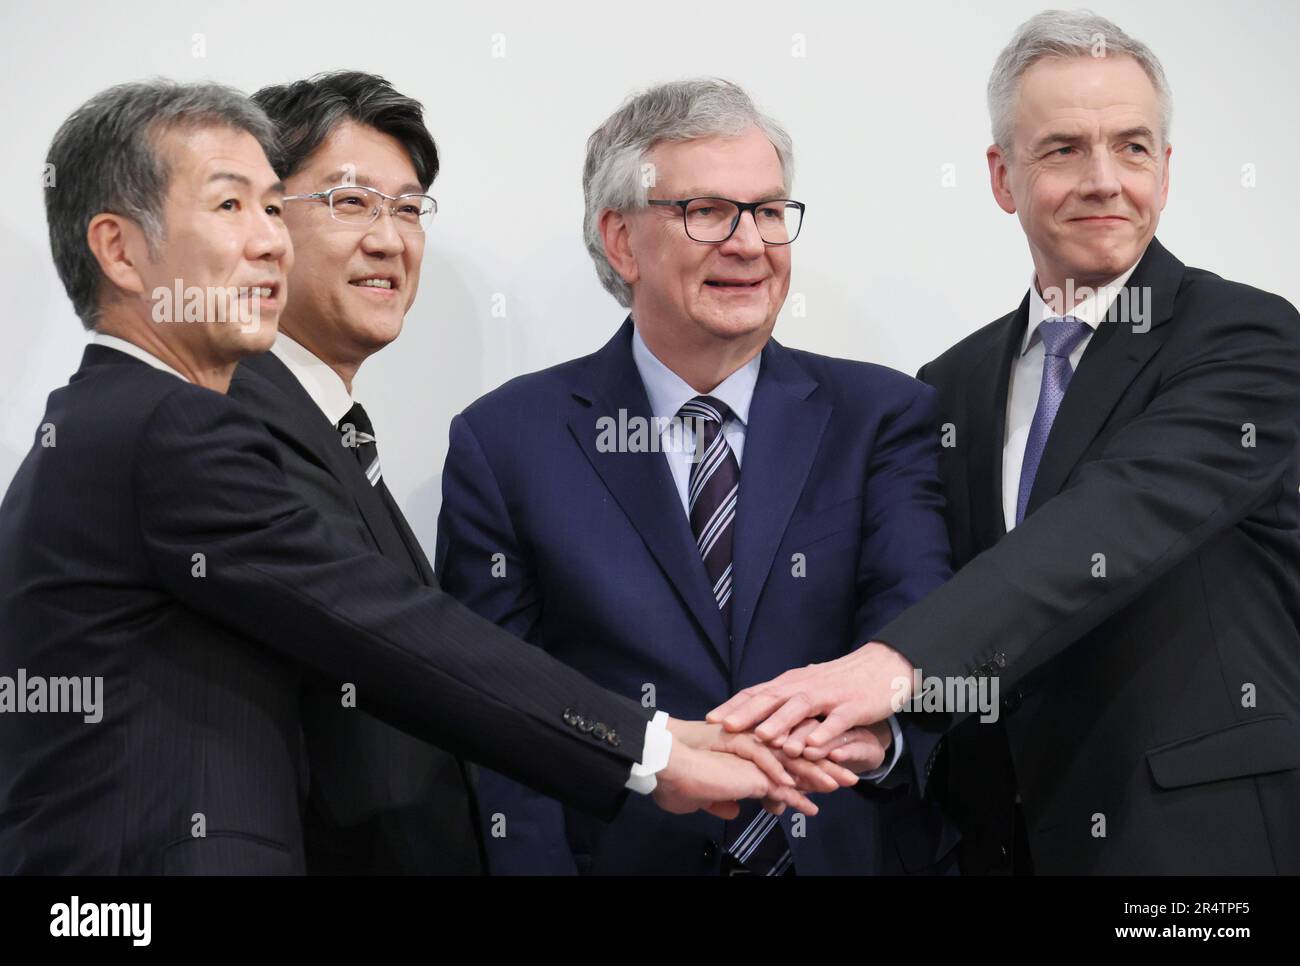 May 30, 2023, Tokyo, Japan - (L-R) Japan's Hino Motors CEO Satoshi Ogiso, Toyota Motor CEO Koji Sato, Germany's Daimler Truck CEO Martin Daum and Daimler's subsidiary MFTBC (Mitsubishi Fuso) CEO Karl Depper join their hands as they announced Hino and MFTBC will merge their businesses and Toyota and Daimler Truck will form a holding company at a press conference in Tokyo on Tuesday, May 30, 2023.     (photo by Yoshio Tsunoda/AFLO) Stock Photo